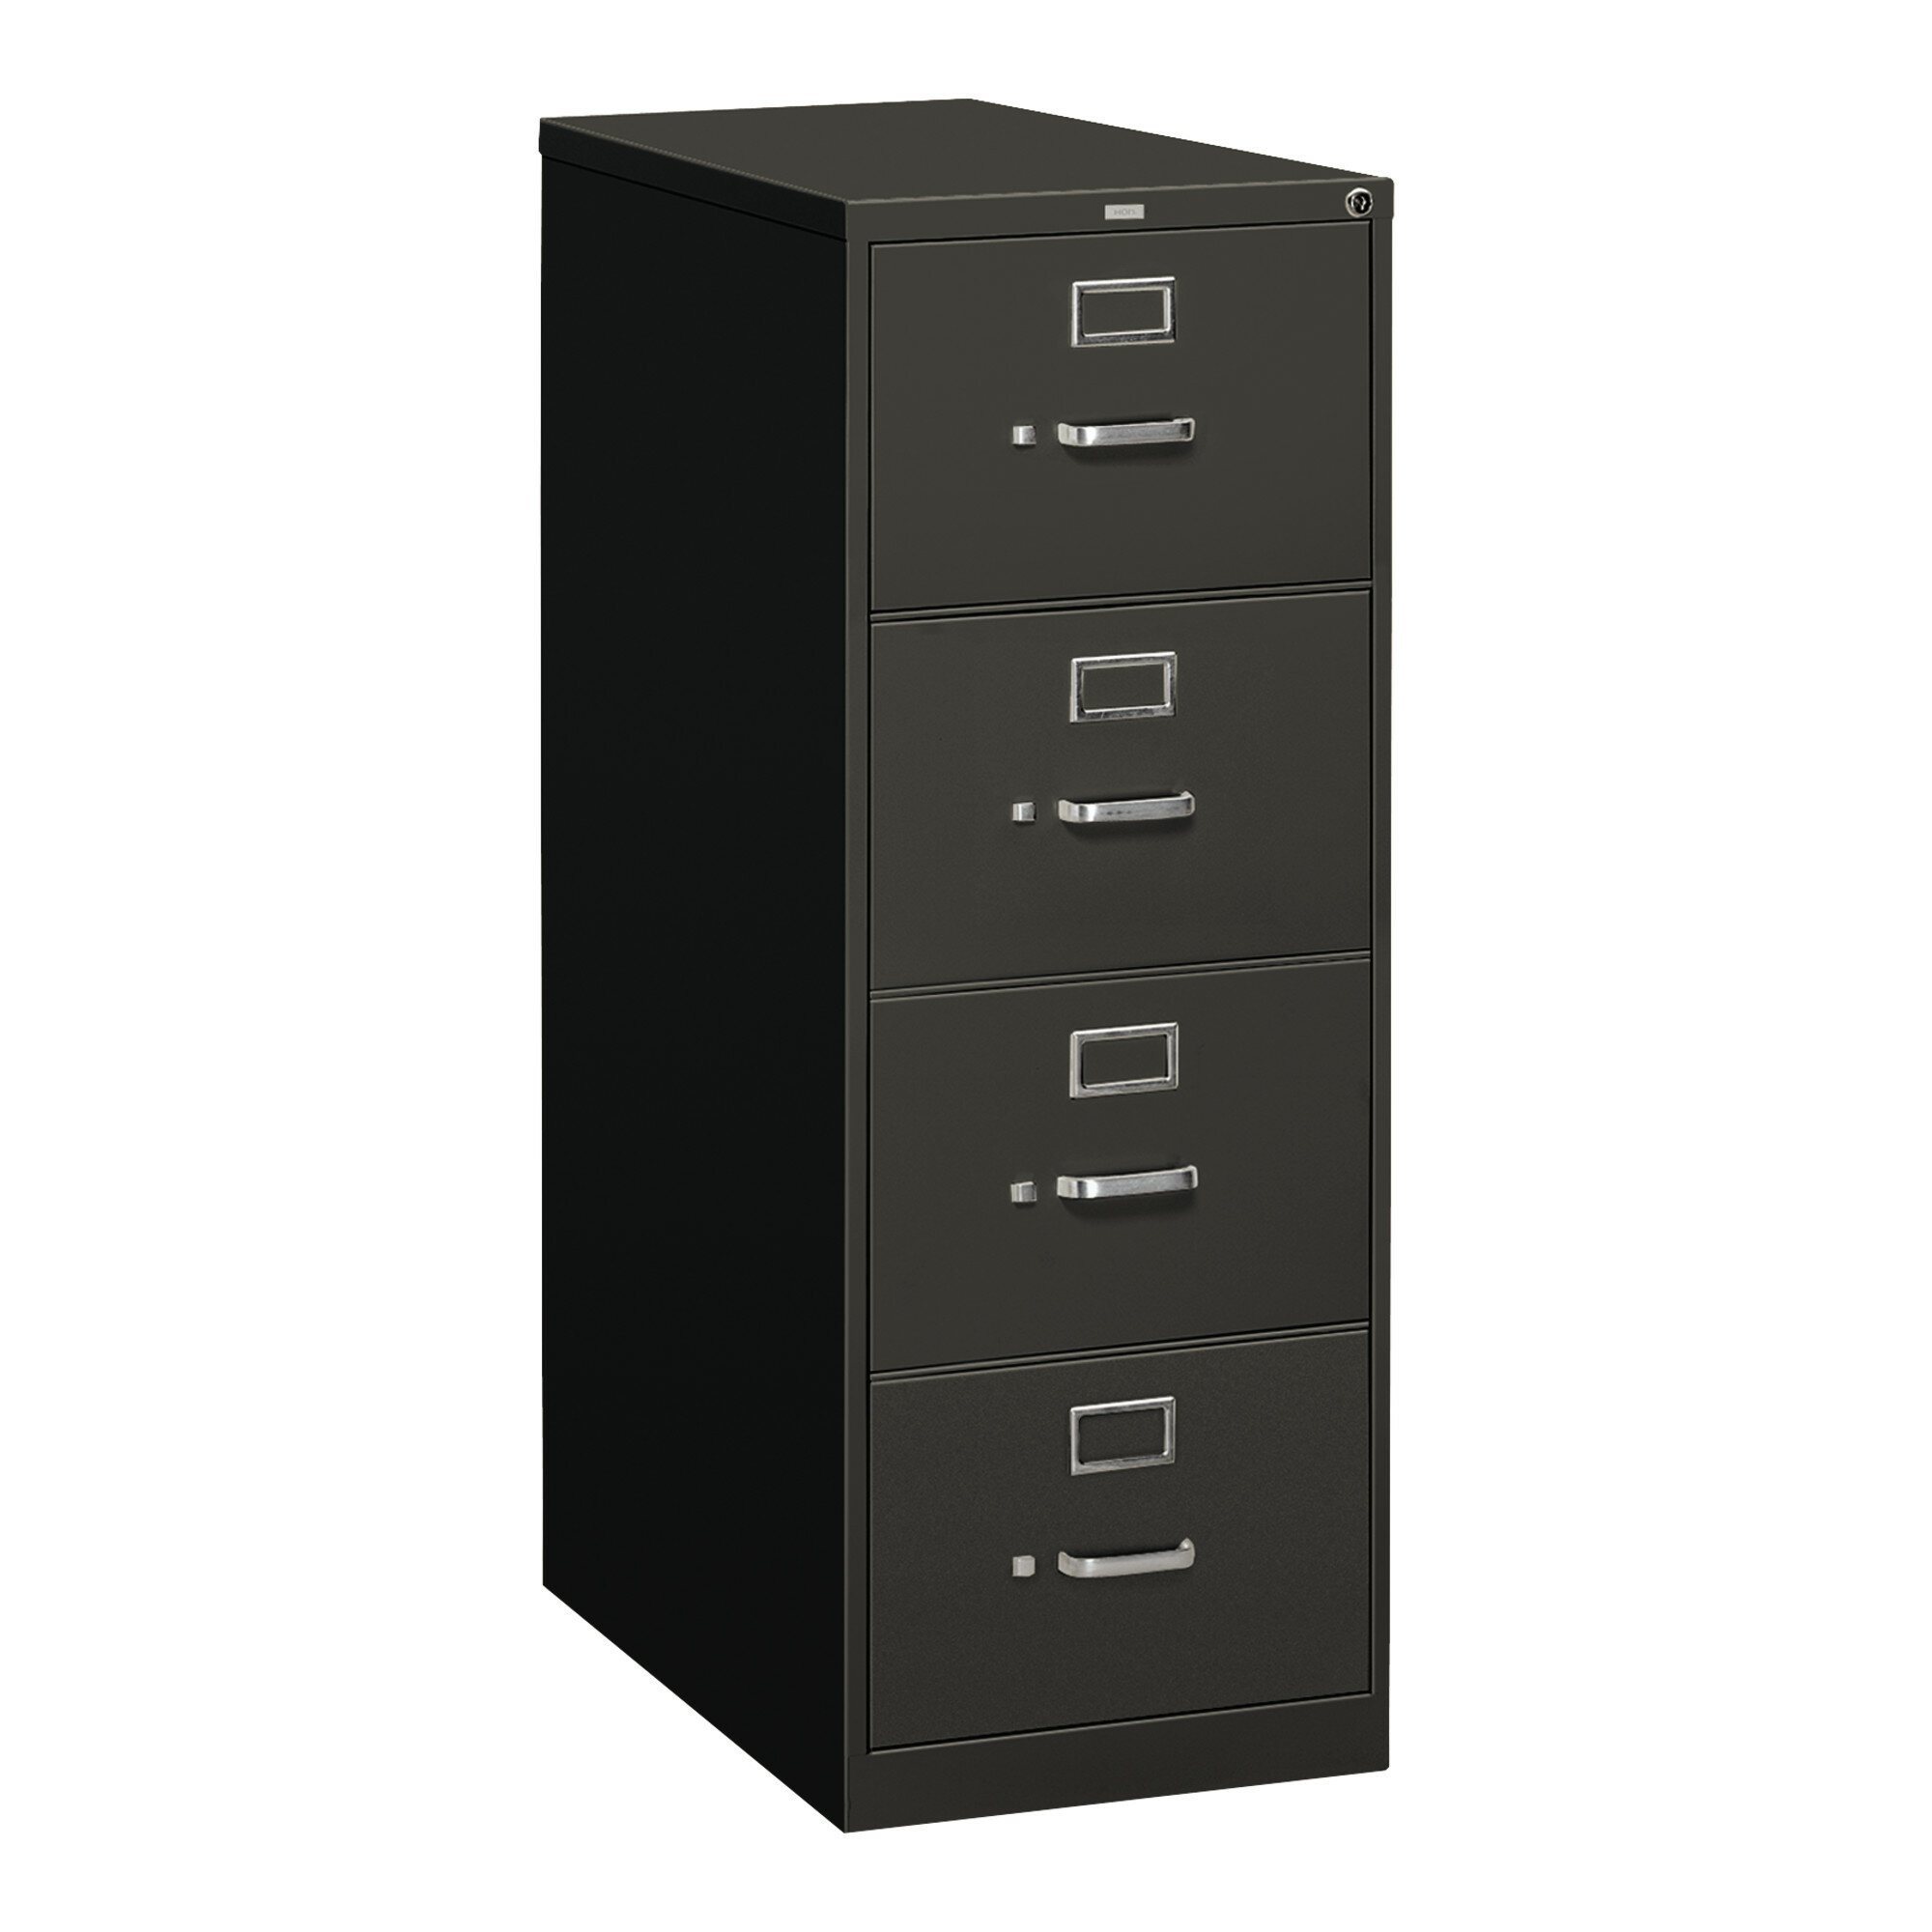 Hon 310 Series 4 Drawer Vertical Filing Cabinet Wayfair within proportions 2000 X 2000